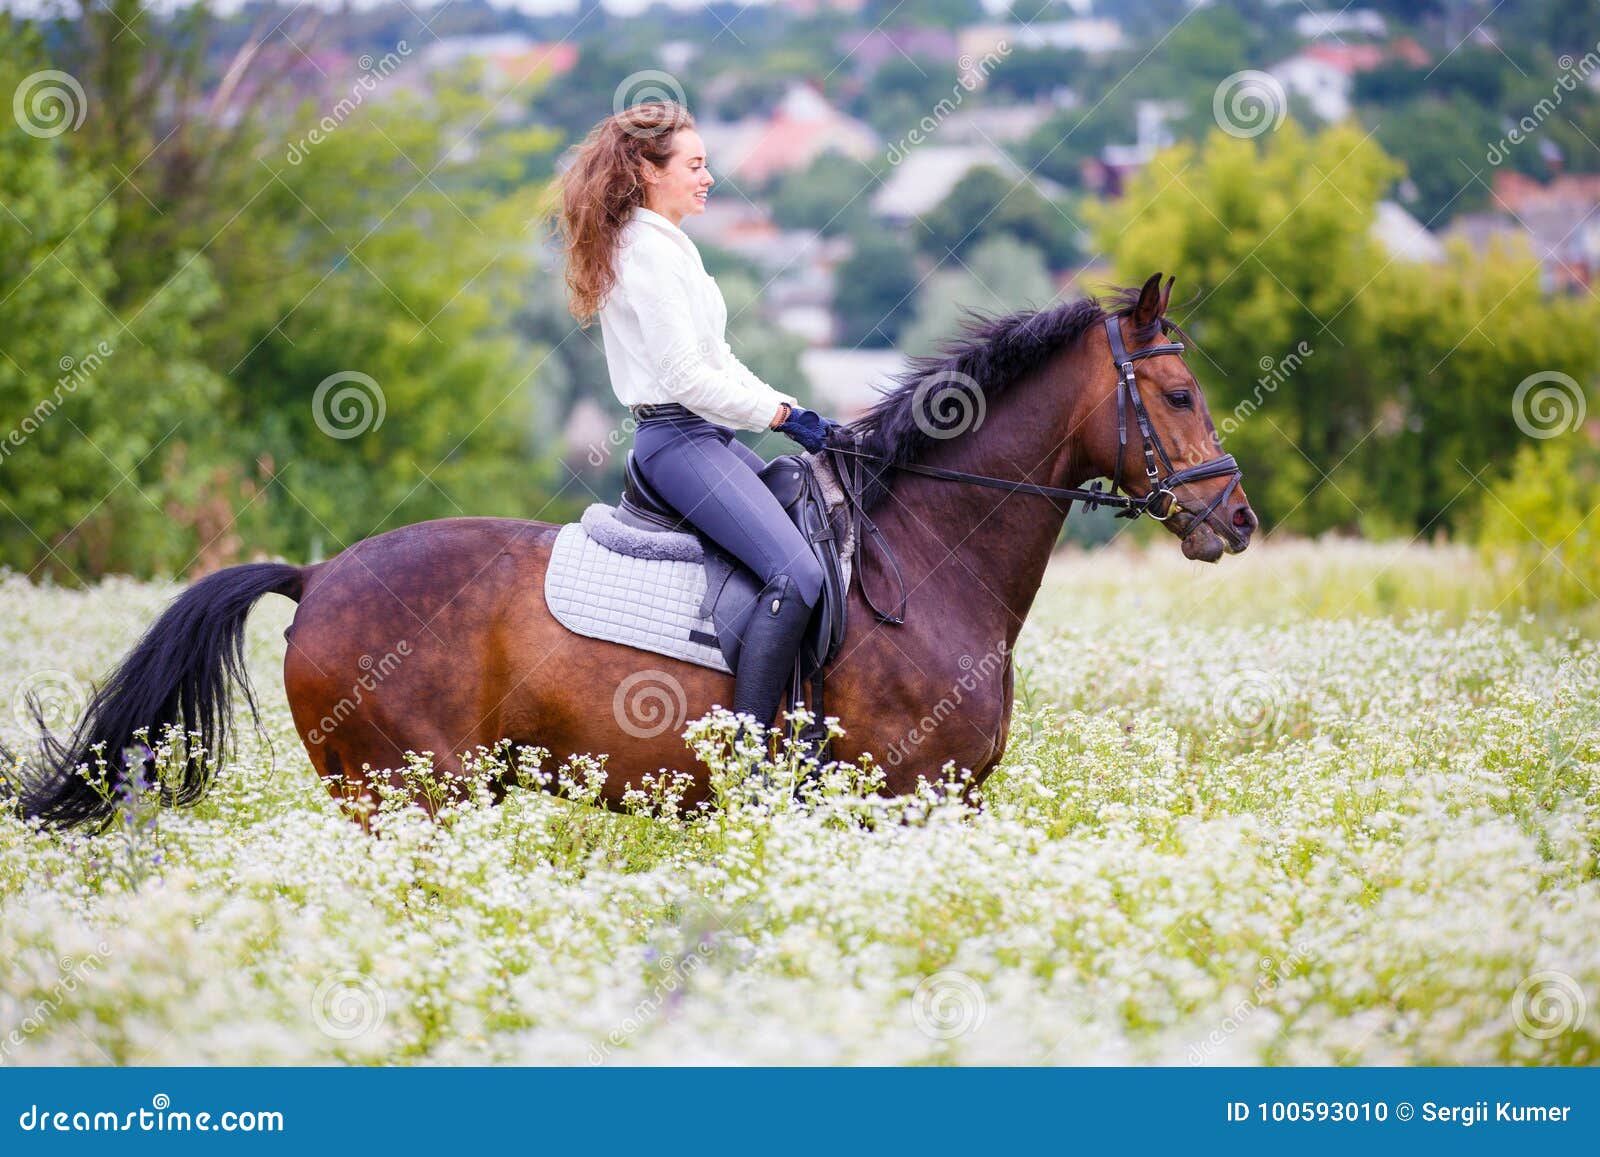 Young Girl with Long Hair Riding Horse on Field Stock Photo - Image of  canter, cowgirl: 100593010